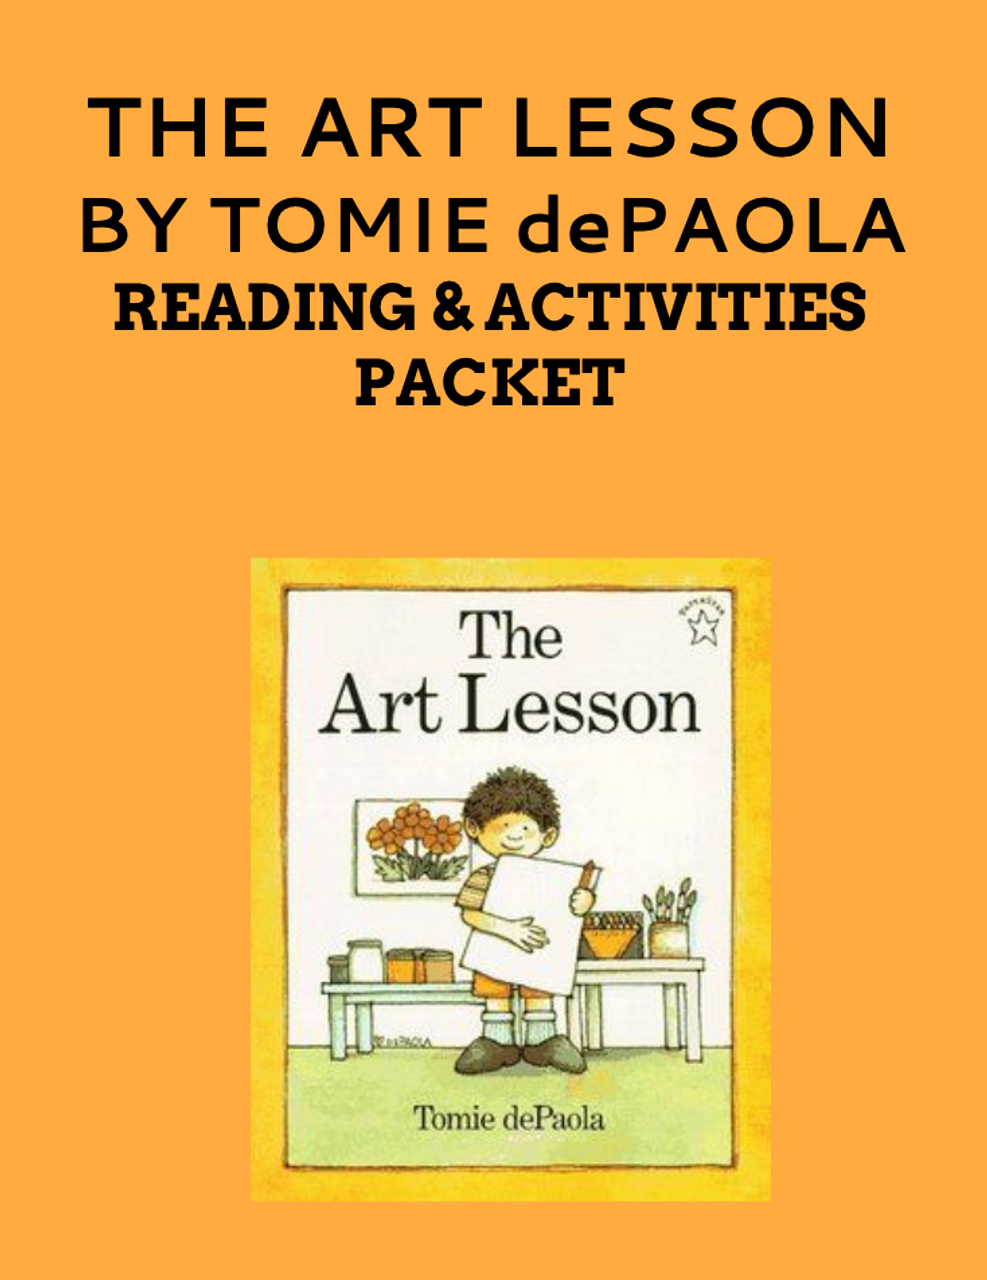 THE ART LESSON BY TOMIE dePAOLA READING ACTIVITY UNIT